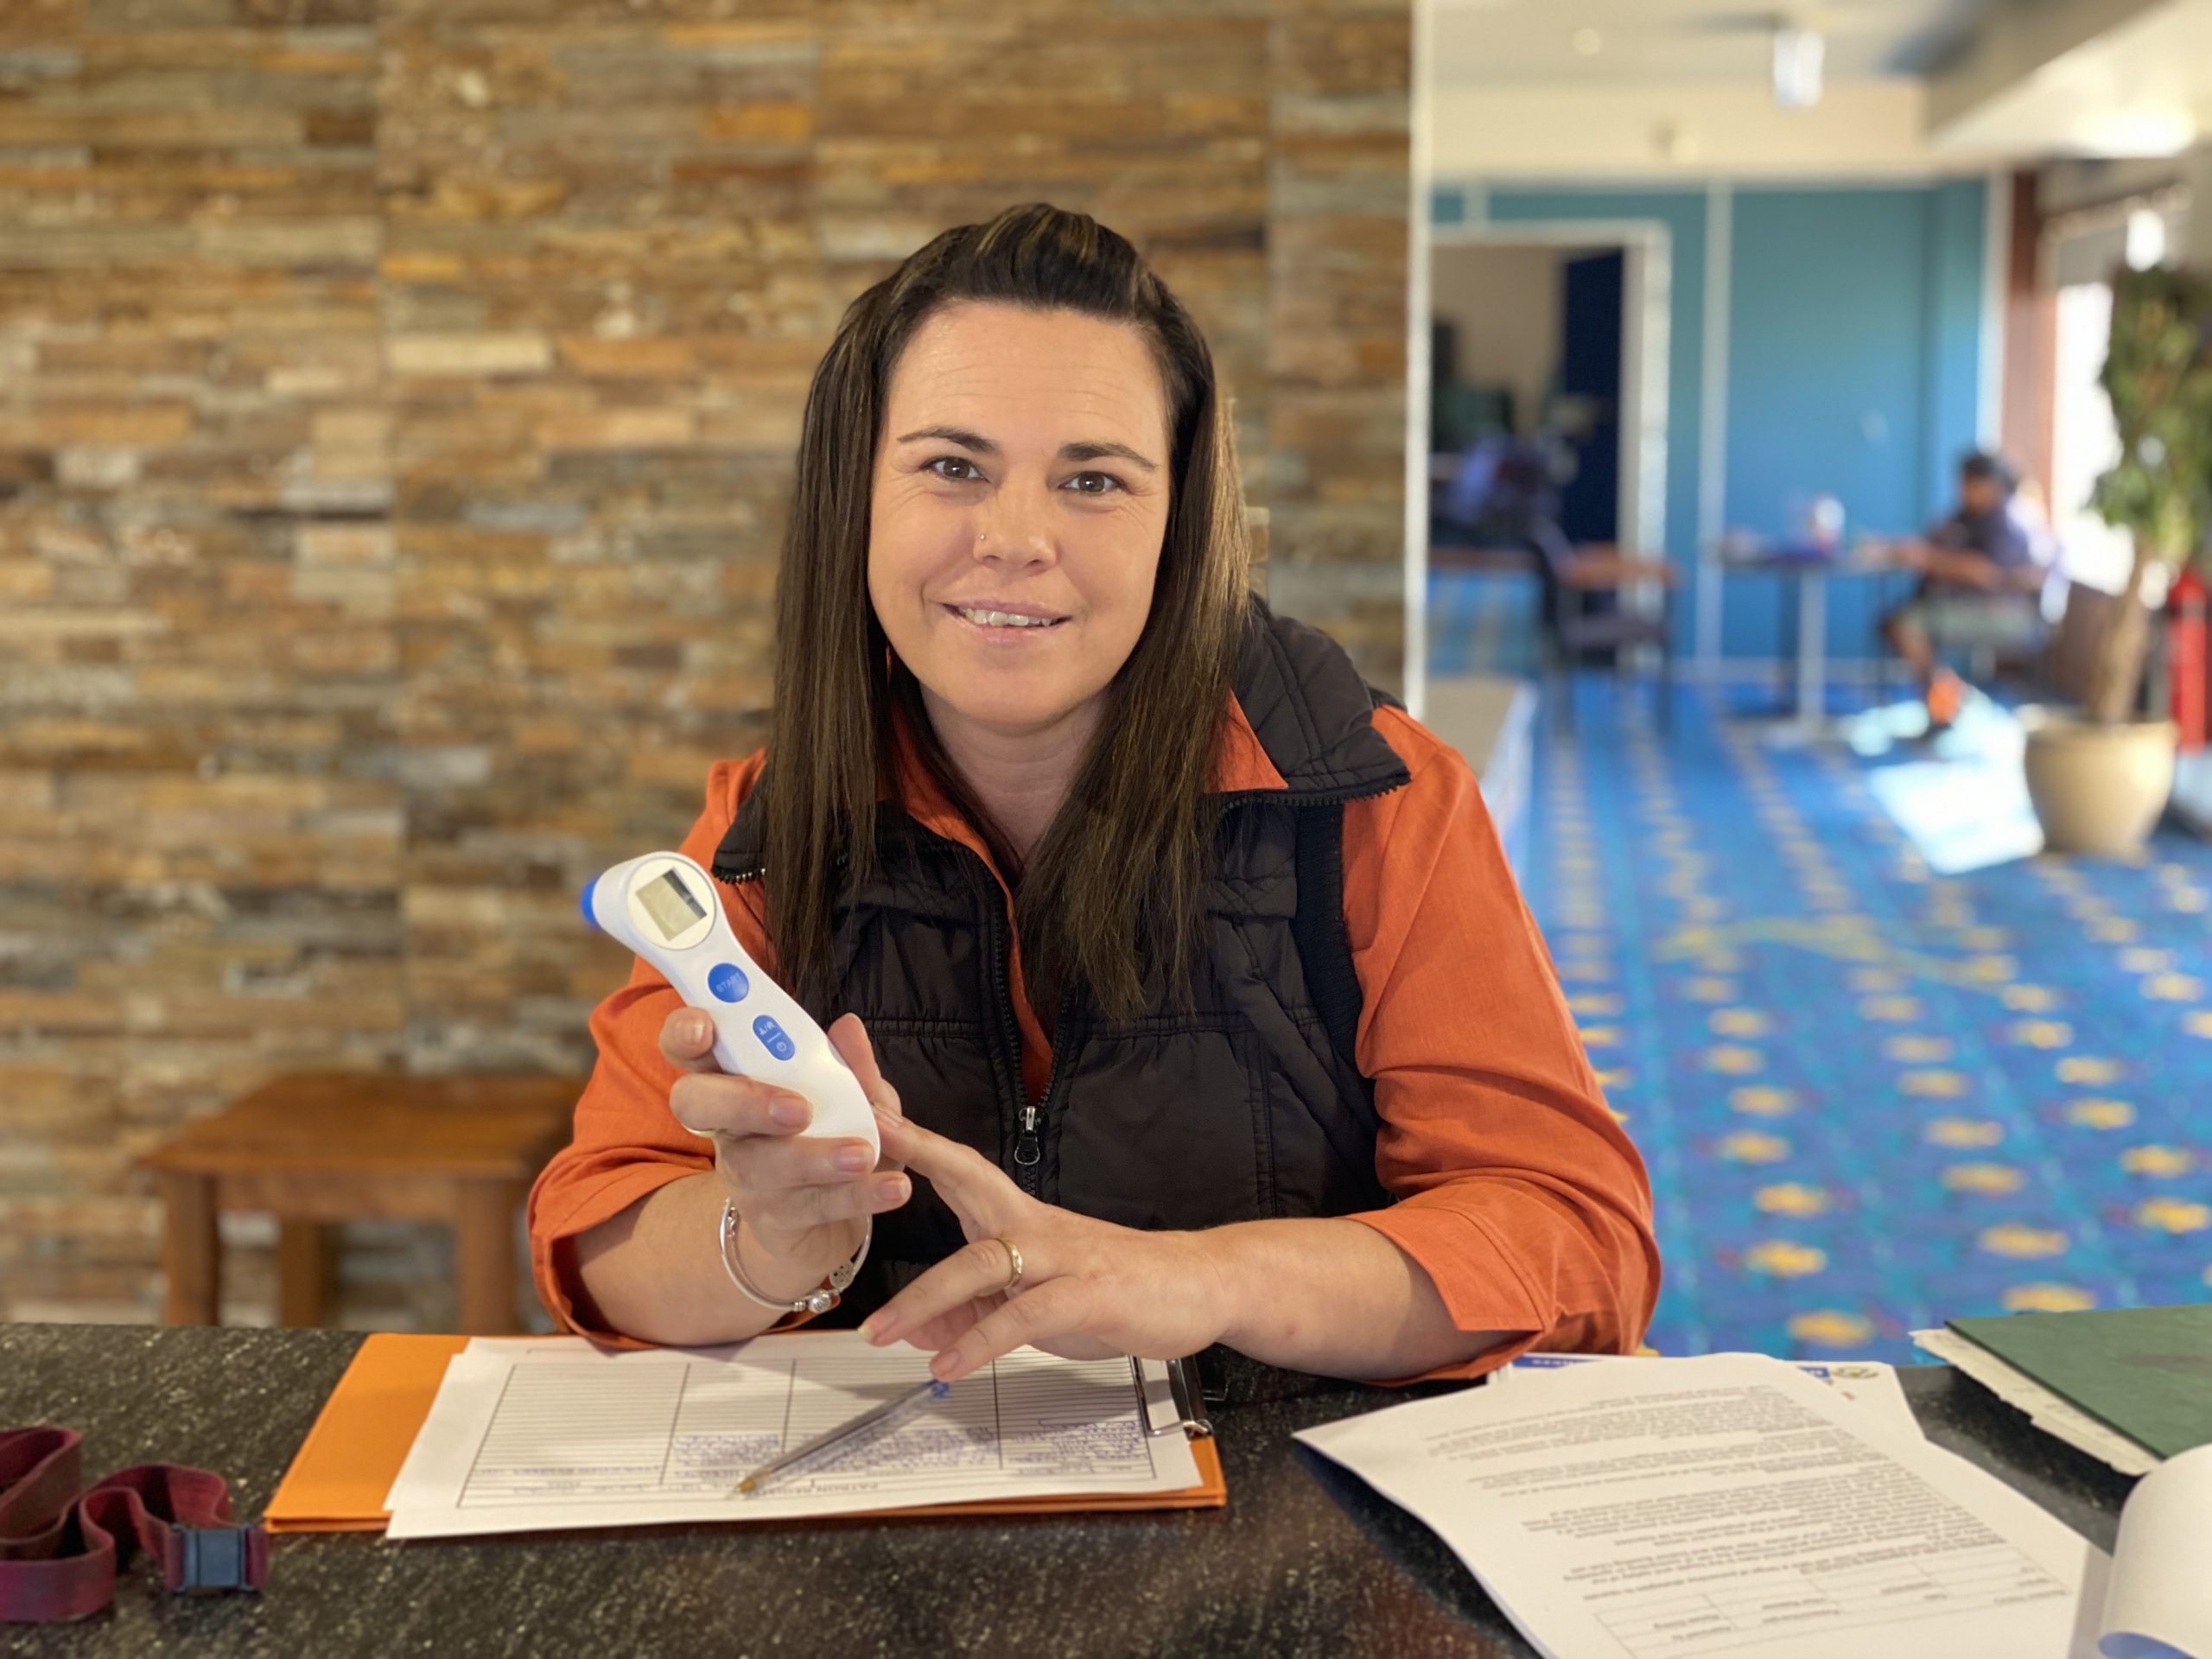 Wee Waa Bowling Club employee Renee Doring was implementing a number of COVID-19 precautions including taking people’s temperatures on entry, patrons’ names and offering hand sanitiser.